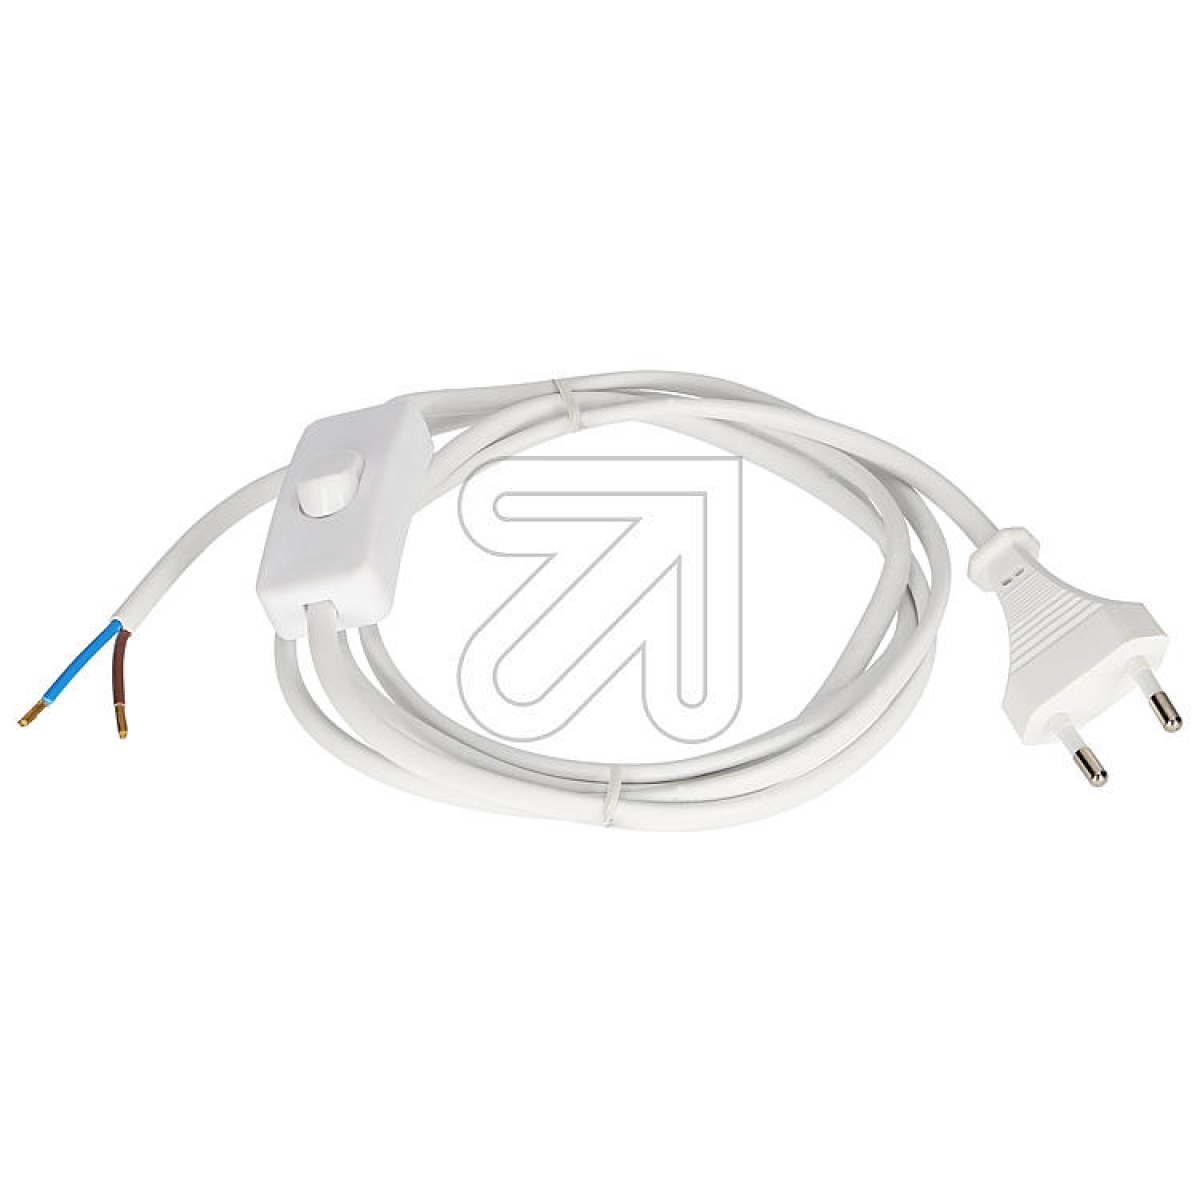 MPFEuro connection cable, H03 VVH2-F, 2 x 0.75², 2 m, with switch white (Replacement item for 022910)-Price for 5 pcs.Article-No: 431807PFL